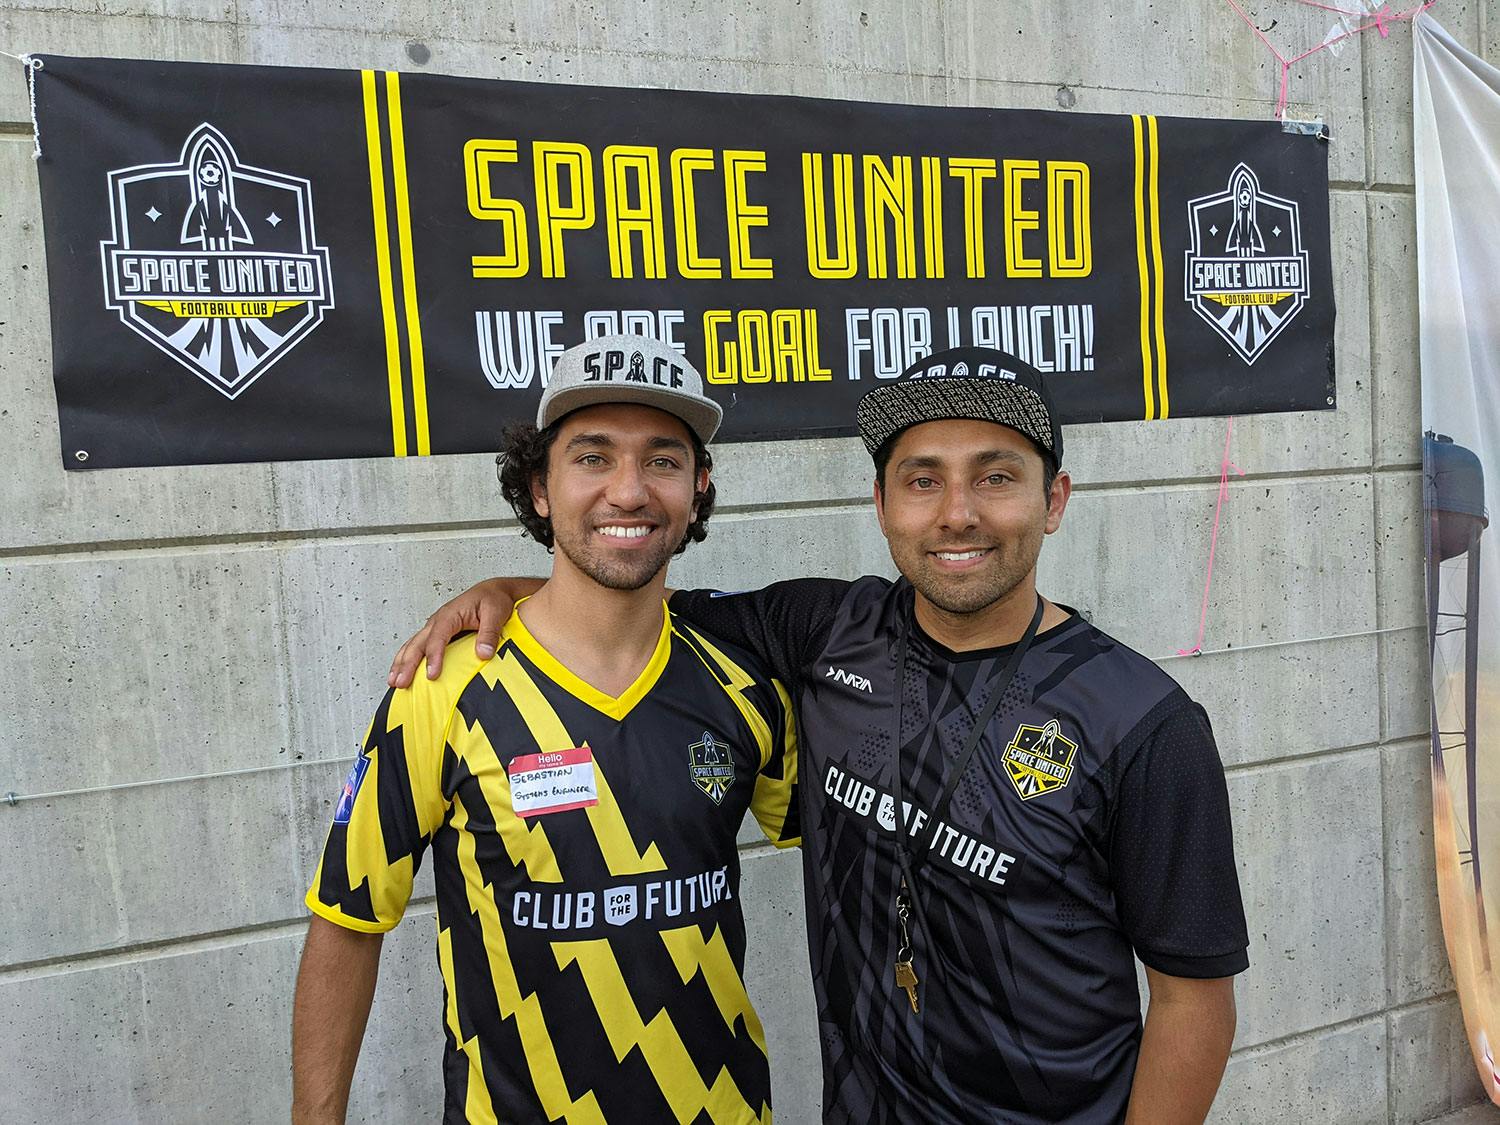 Two men in soccer jerseys and hats in front of a 'Space United' sign